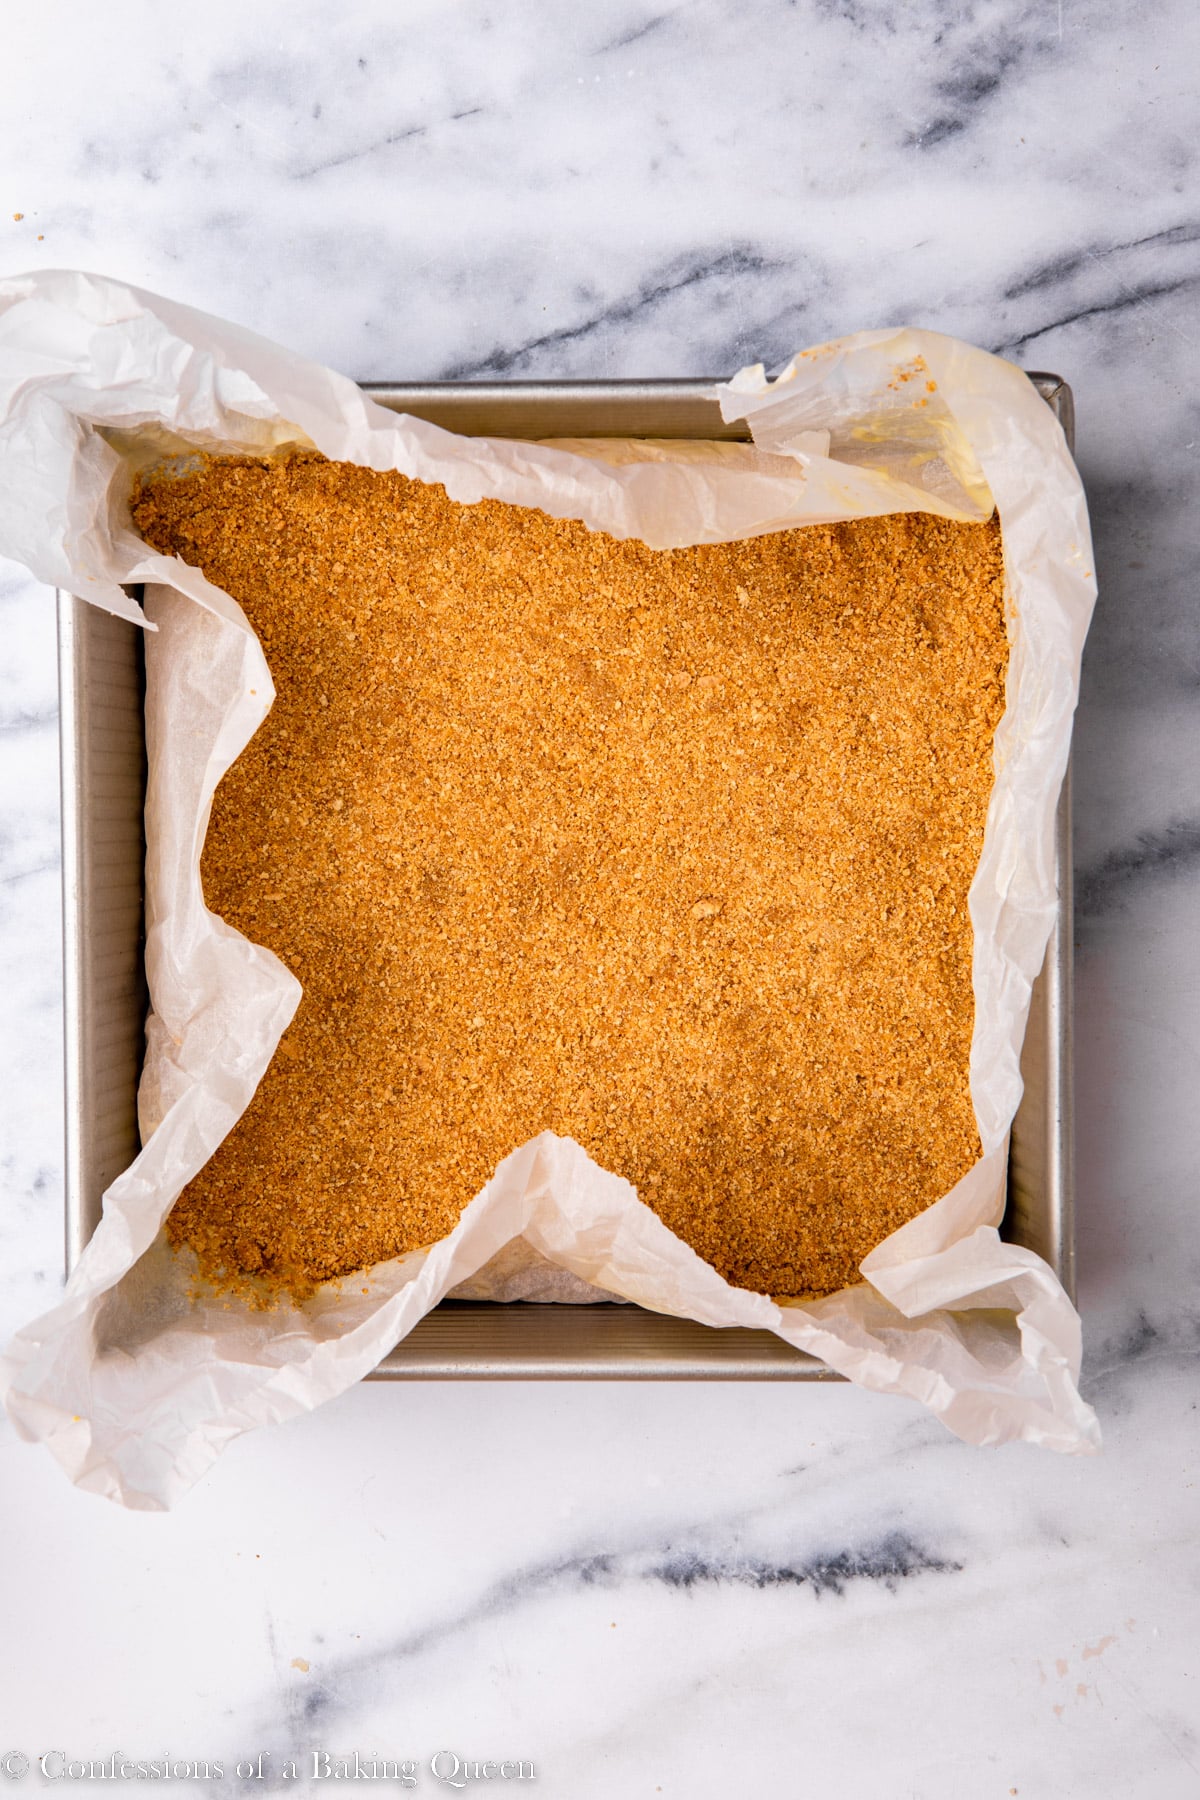 Graham cracker crust for lemon cheesecake bars pressed into a parchment lined baking pan.